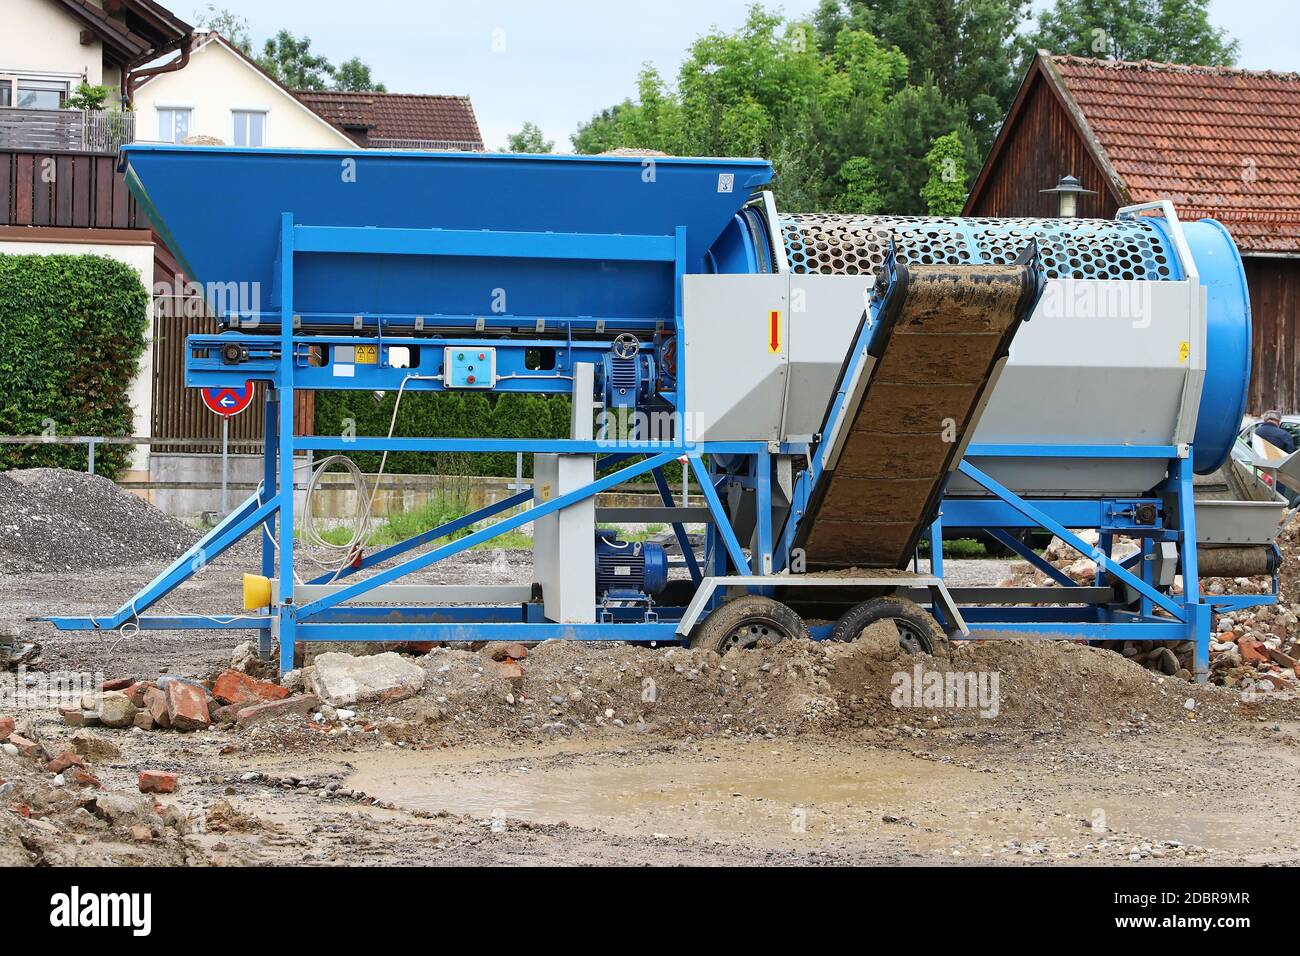 A mobile stone crusher or building rubble shredder for crushing construction material, stones and bricks Stock Photo